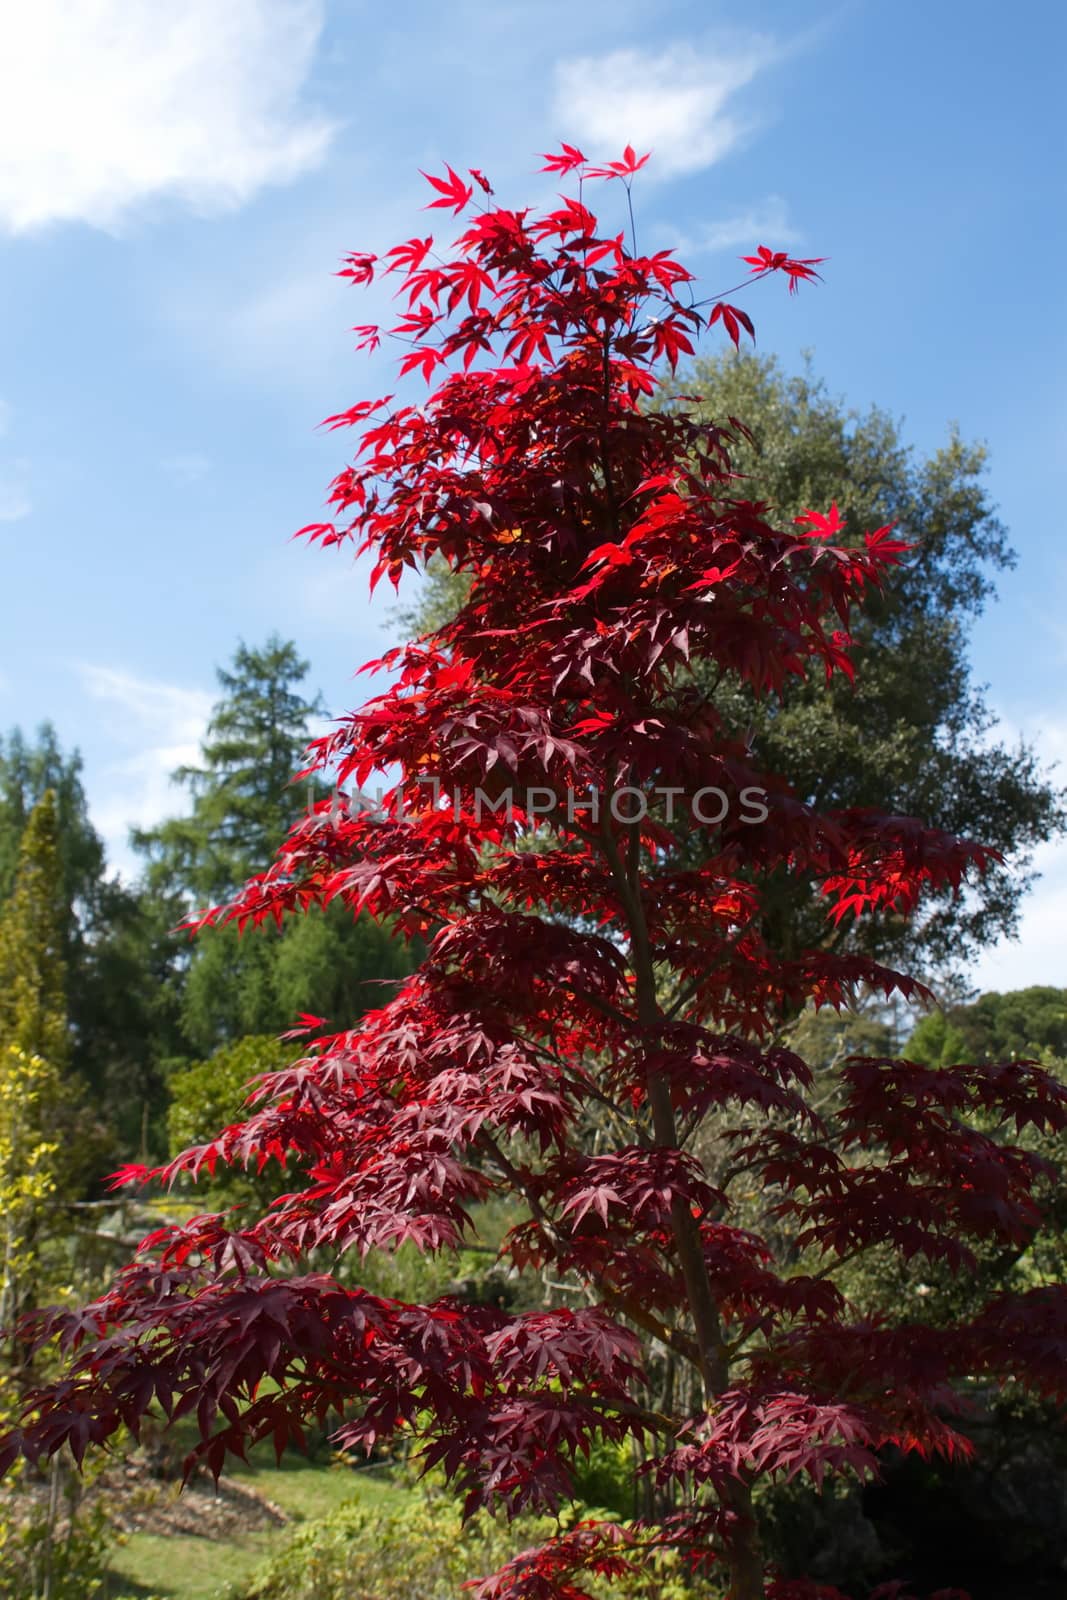 Downy japanese or fullmoon maple (acer japonicum) in a garden